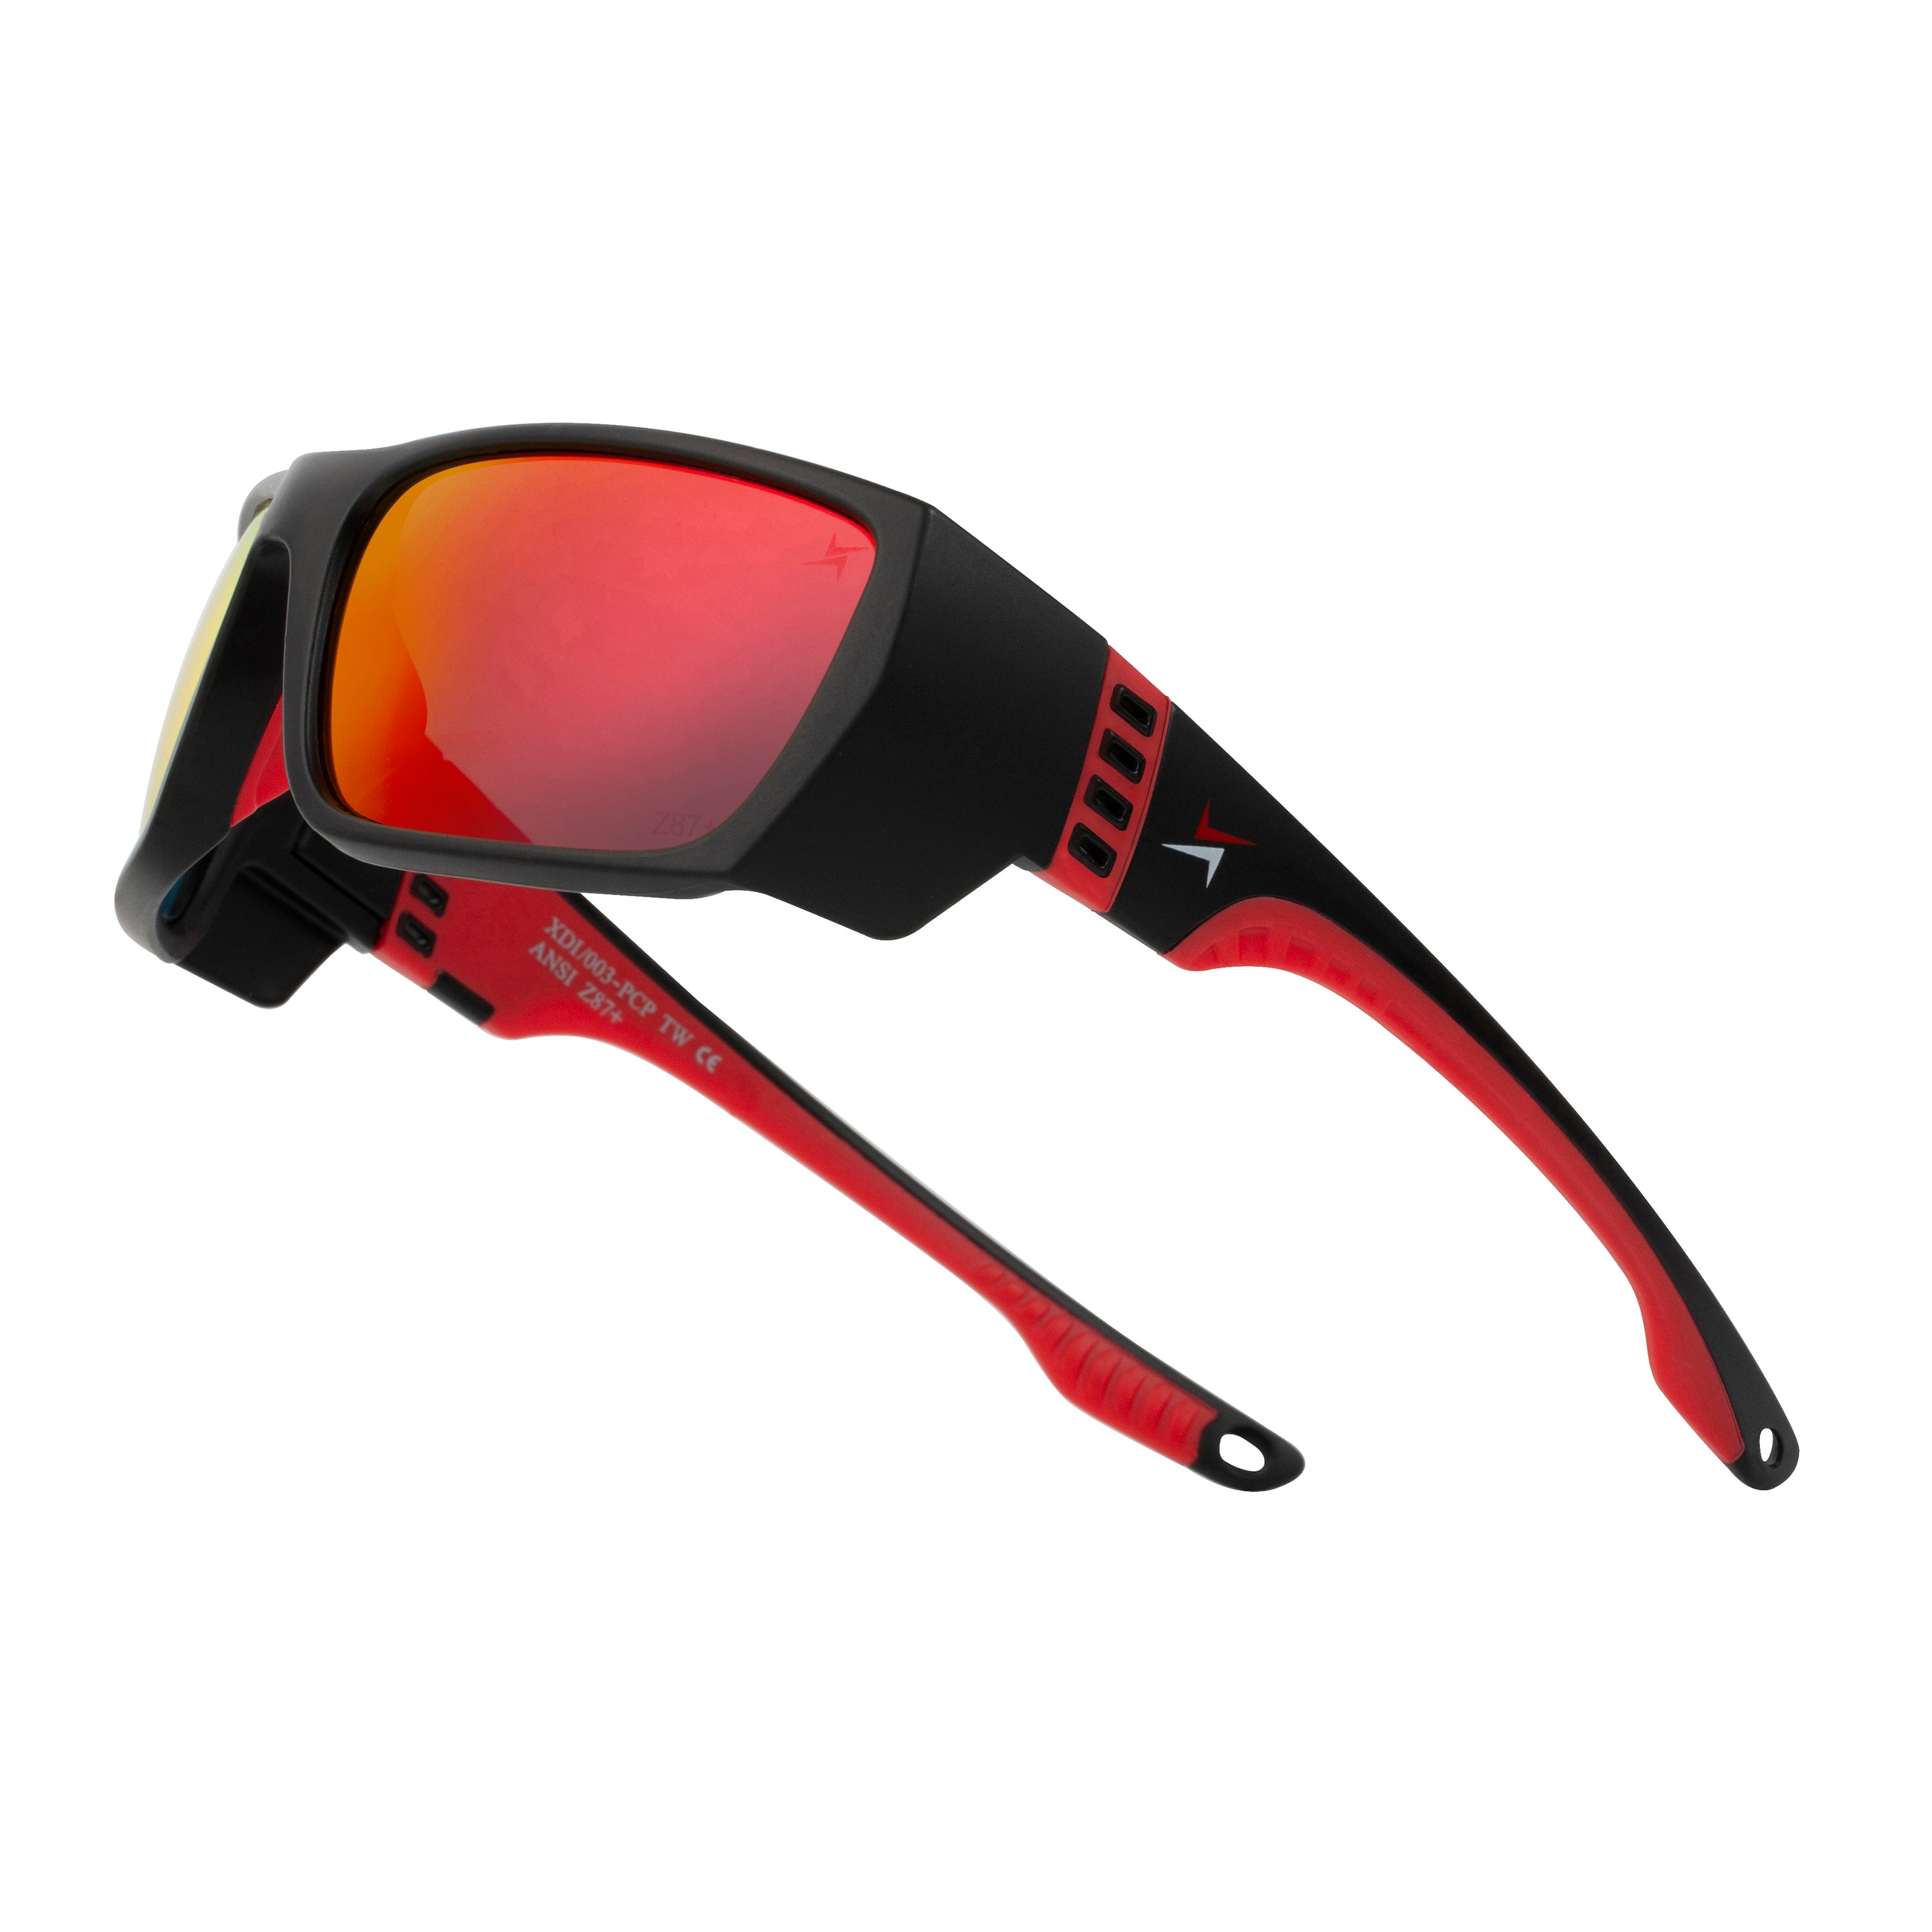 Polycarbonate Polarized Red Mirror Lens Sport Safety Sunglasses with Red Rubber Accents.